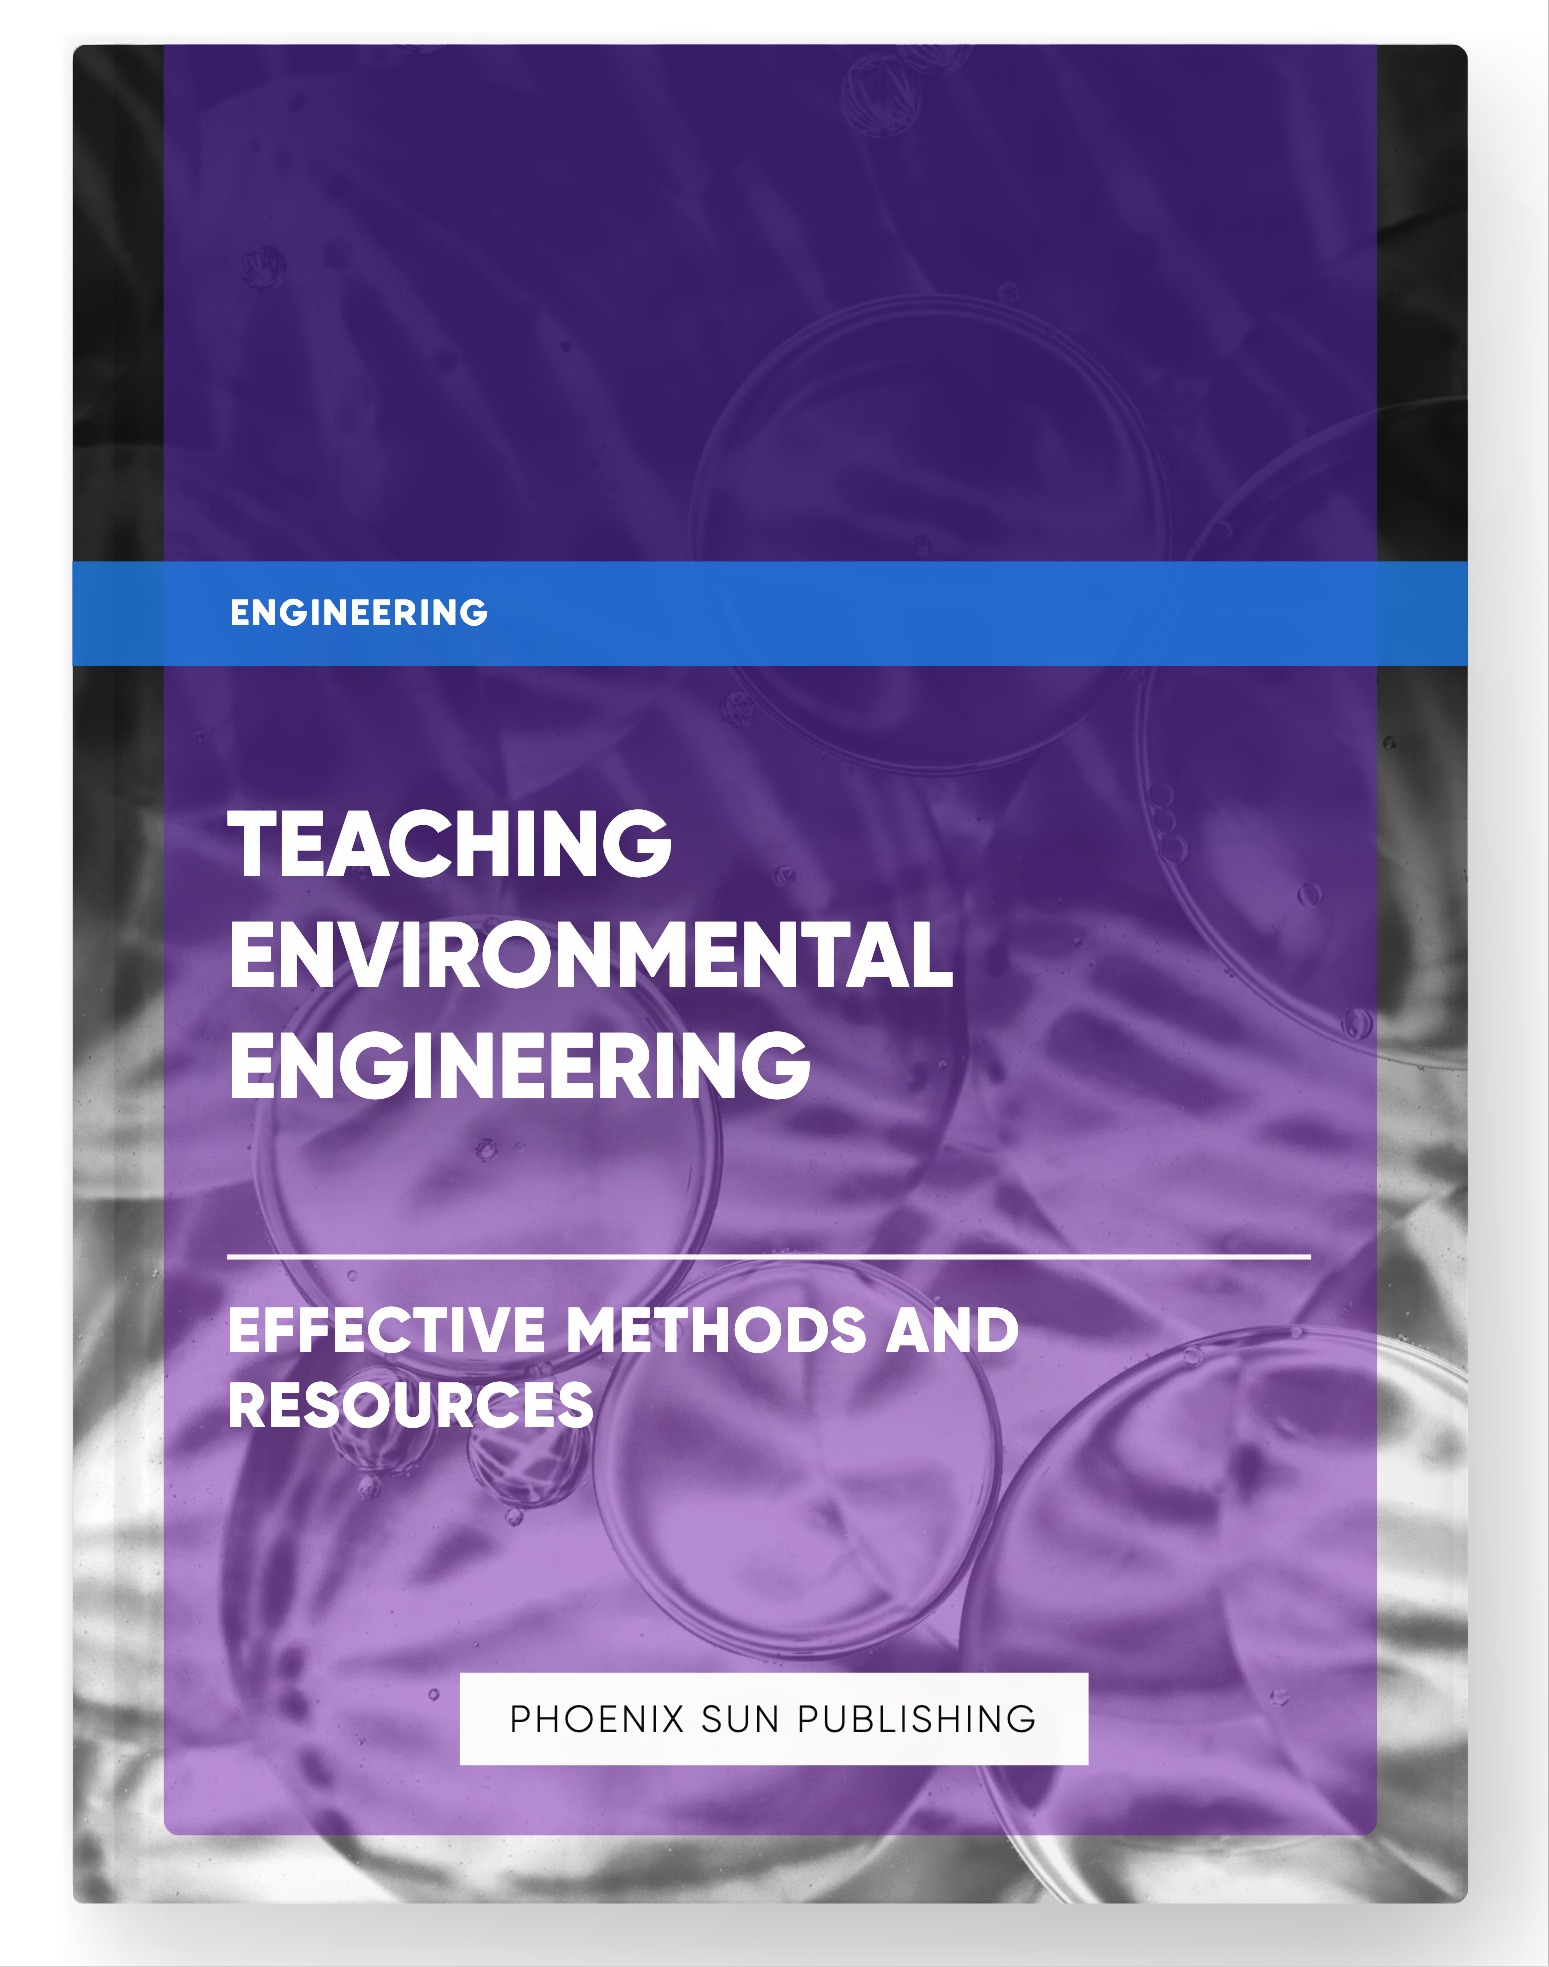 Teaching Environmental Engineering – Effective Methods and Resources